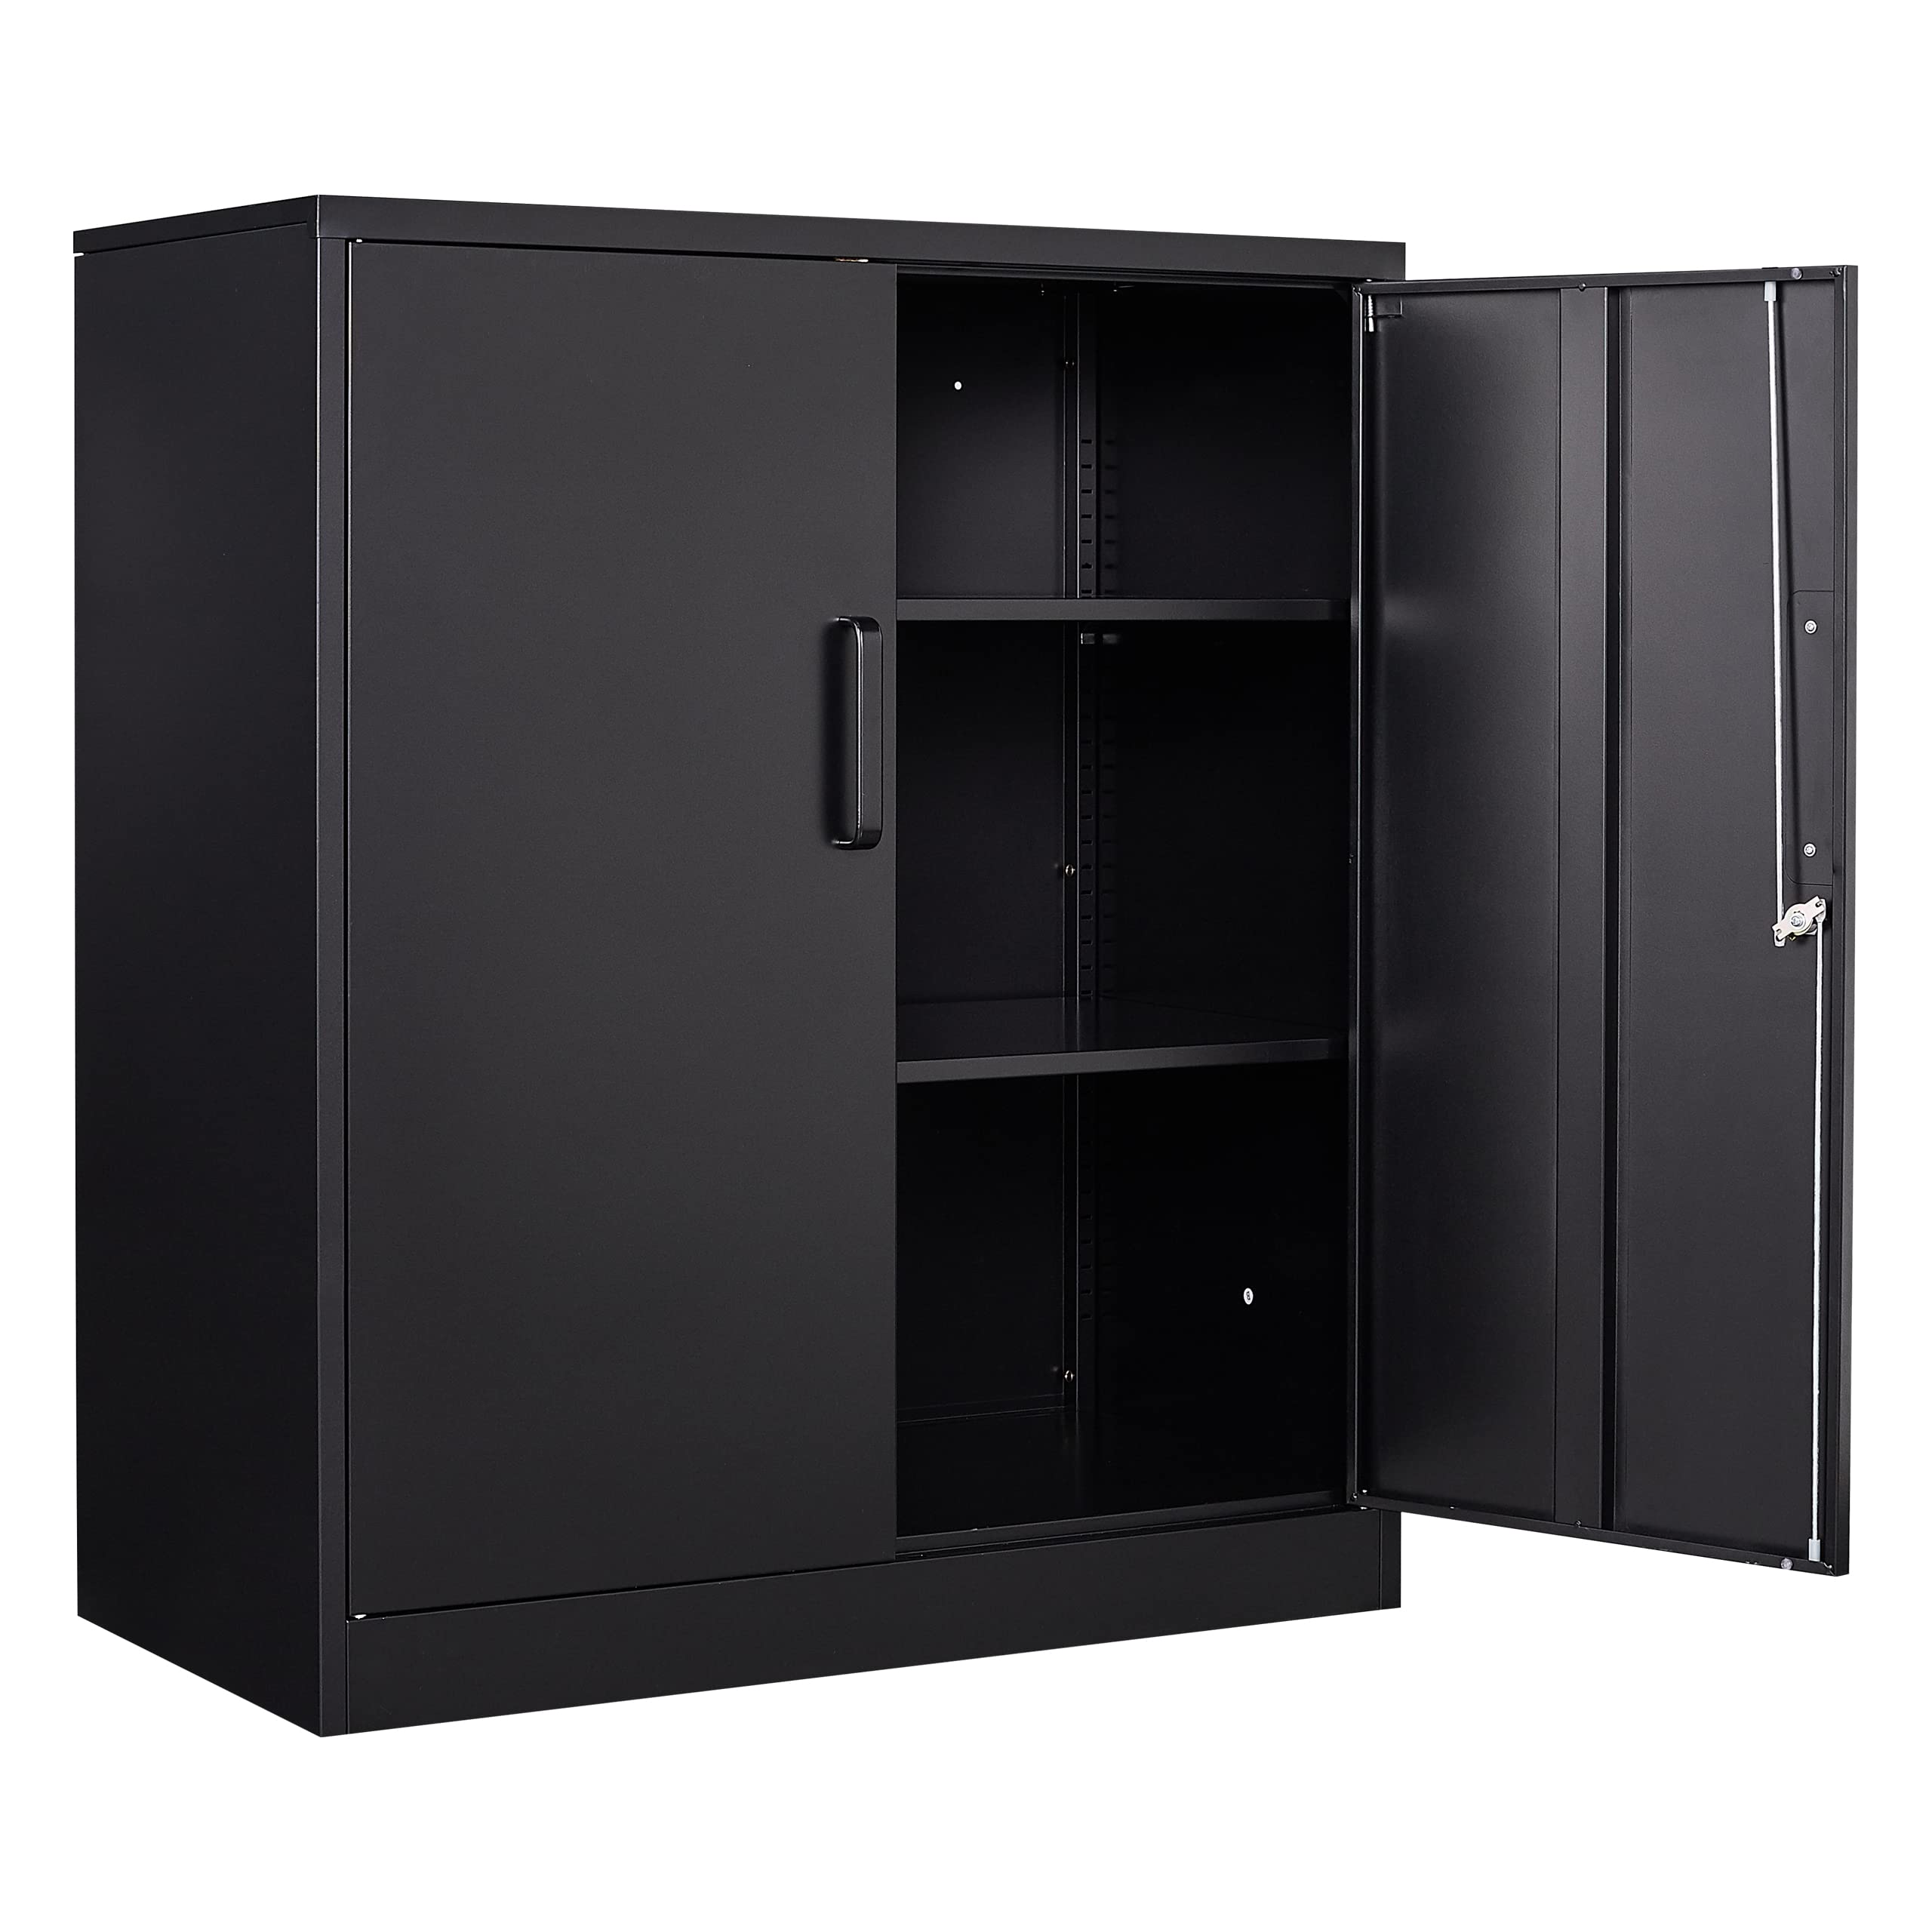 Metal Storage Cabinet Locked Steel Cabinet with 2 Adjustable Shelves Office Cabinet Locking Tool Cabinets Kitchen Storage Cabinet metal locker Small Counter Height Storage Cabinet Cupboard 35.4